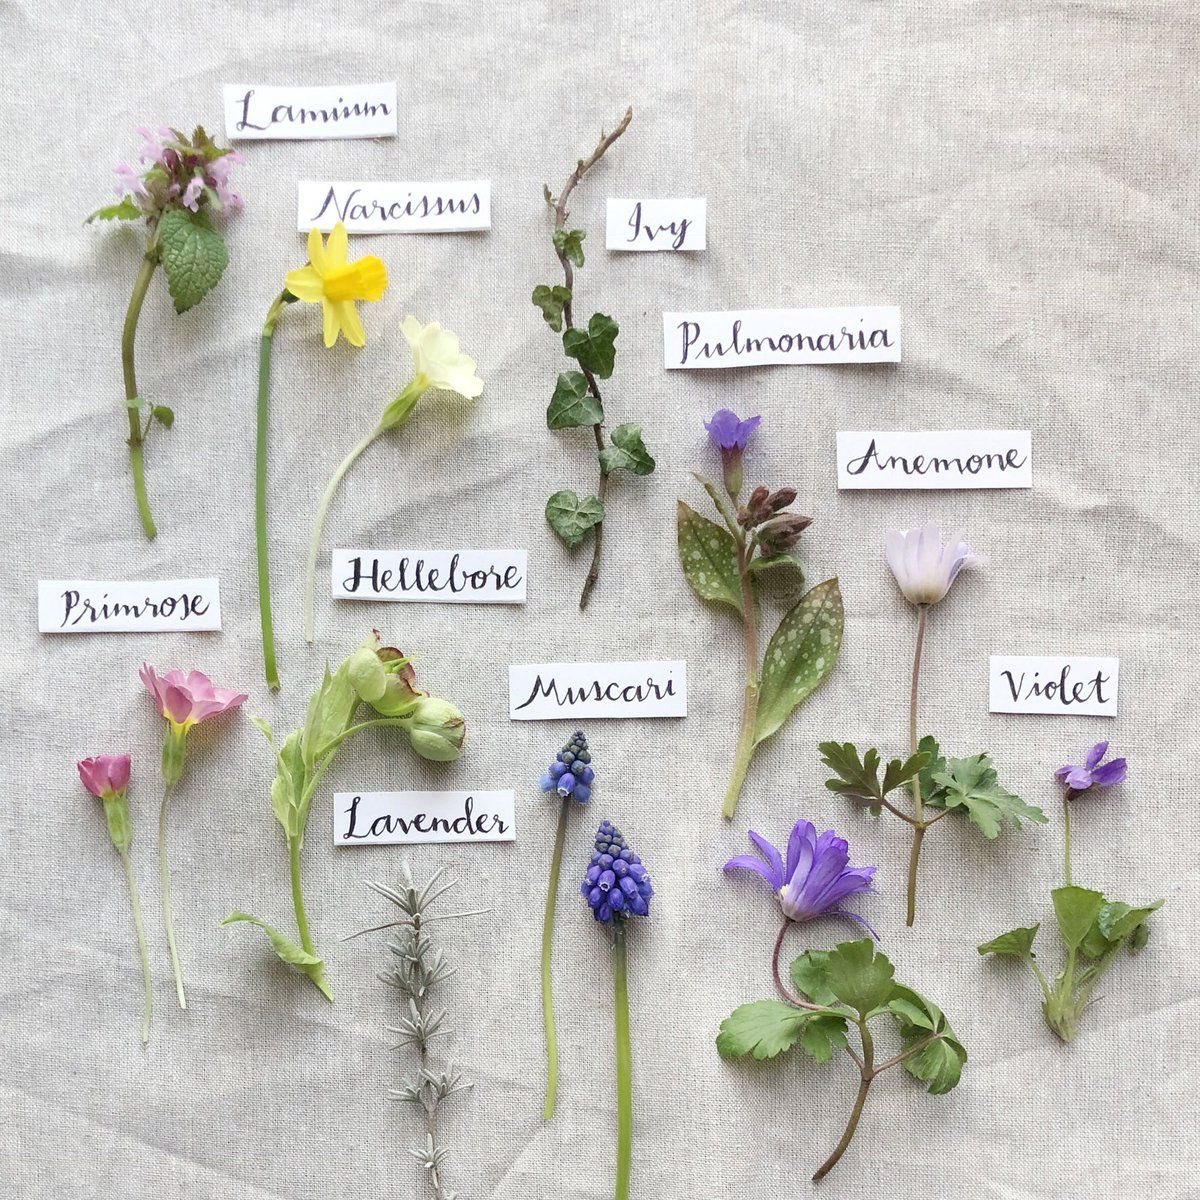 Just found some recent academic papers showing that looking at images of individual plants and flowers alleviates stress, triggers relaxation and speeds up recovery from illness. I KNEW IT. Here, have some of my medicinal photographs x